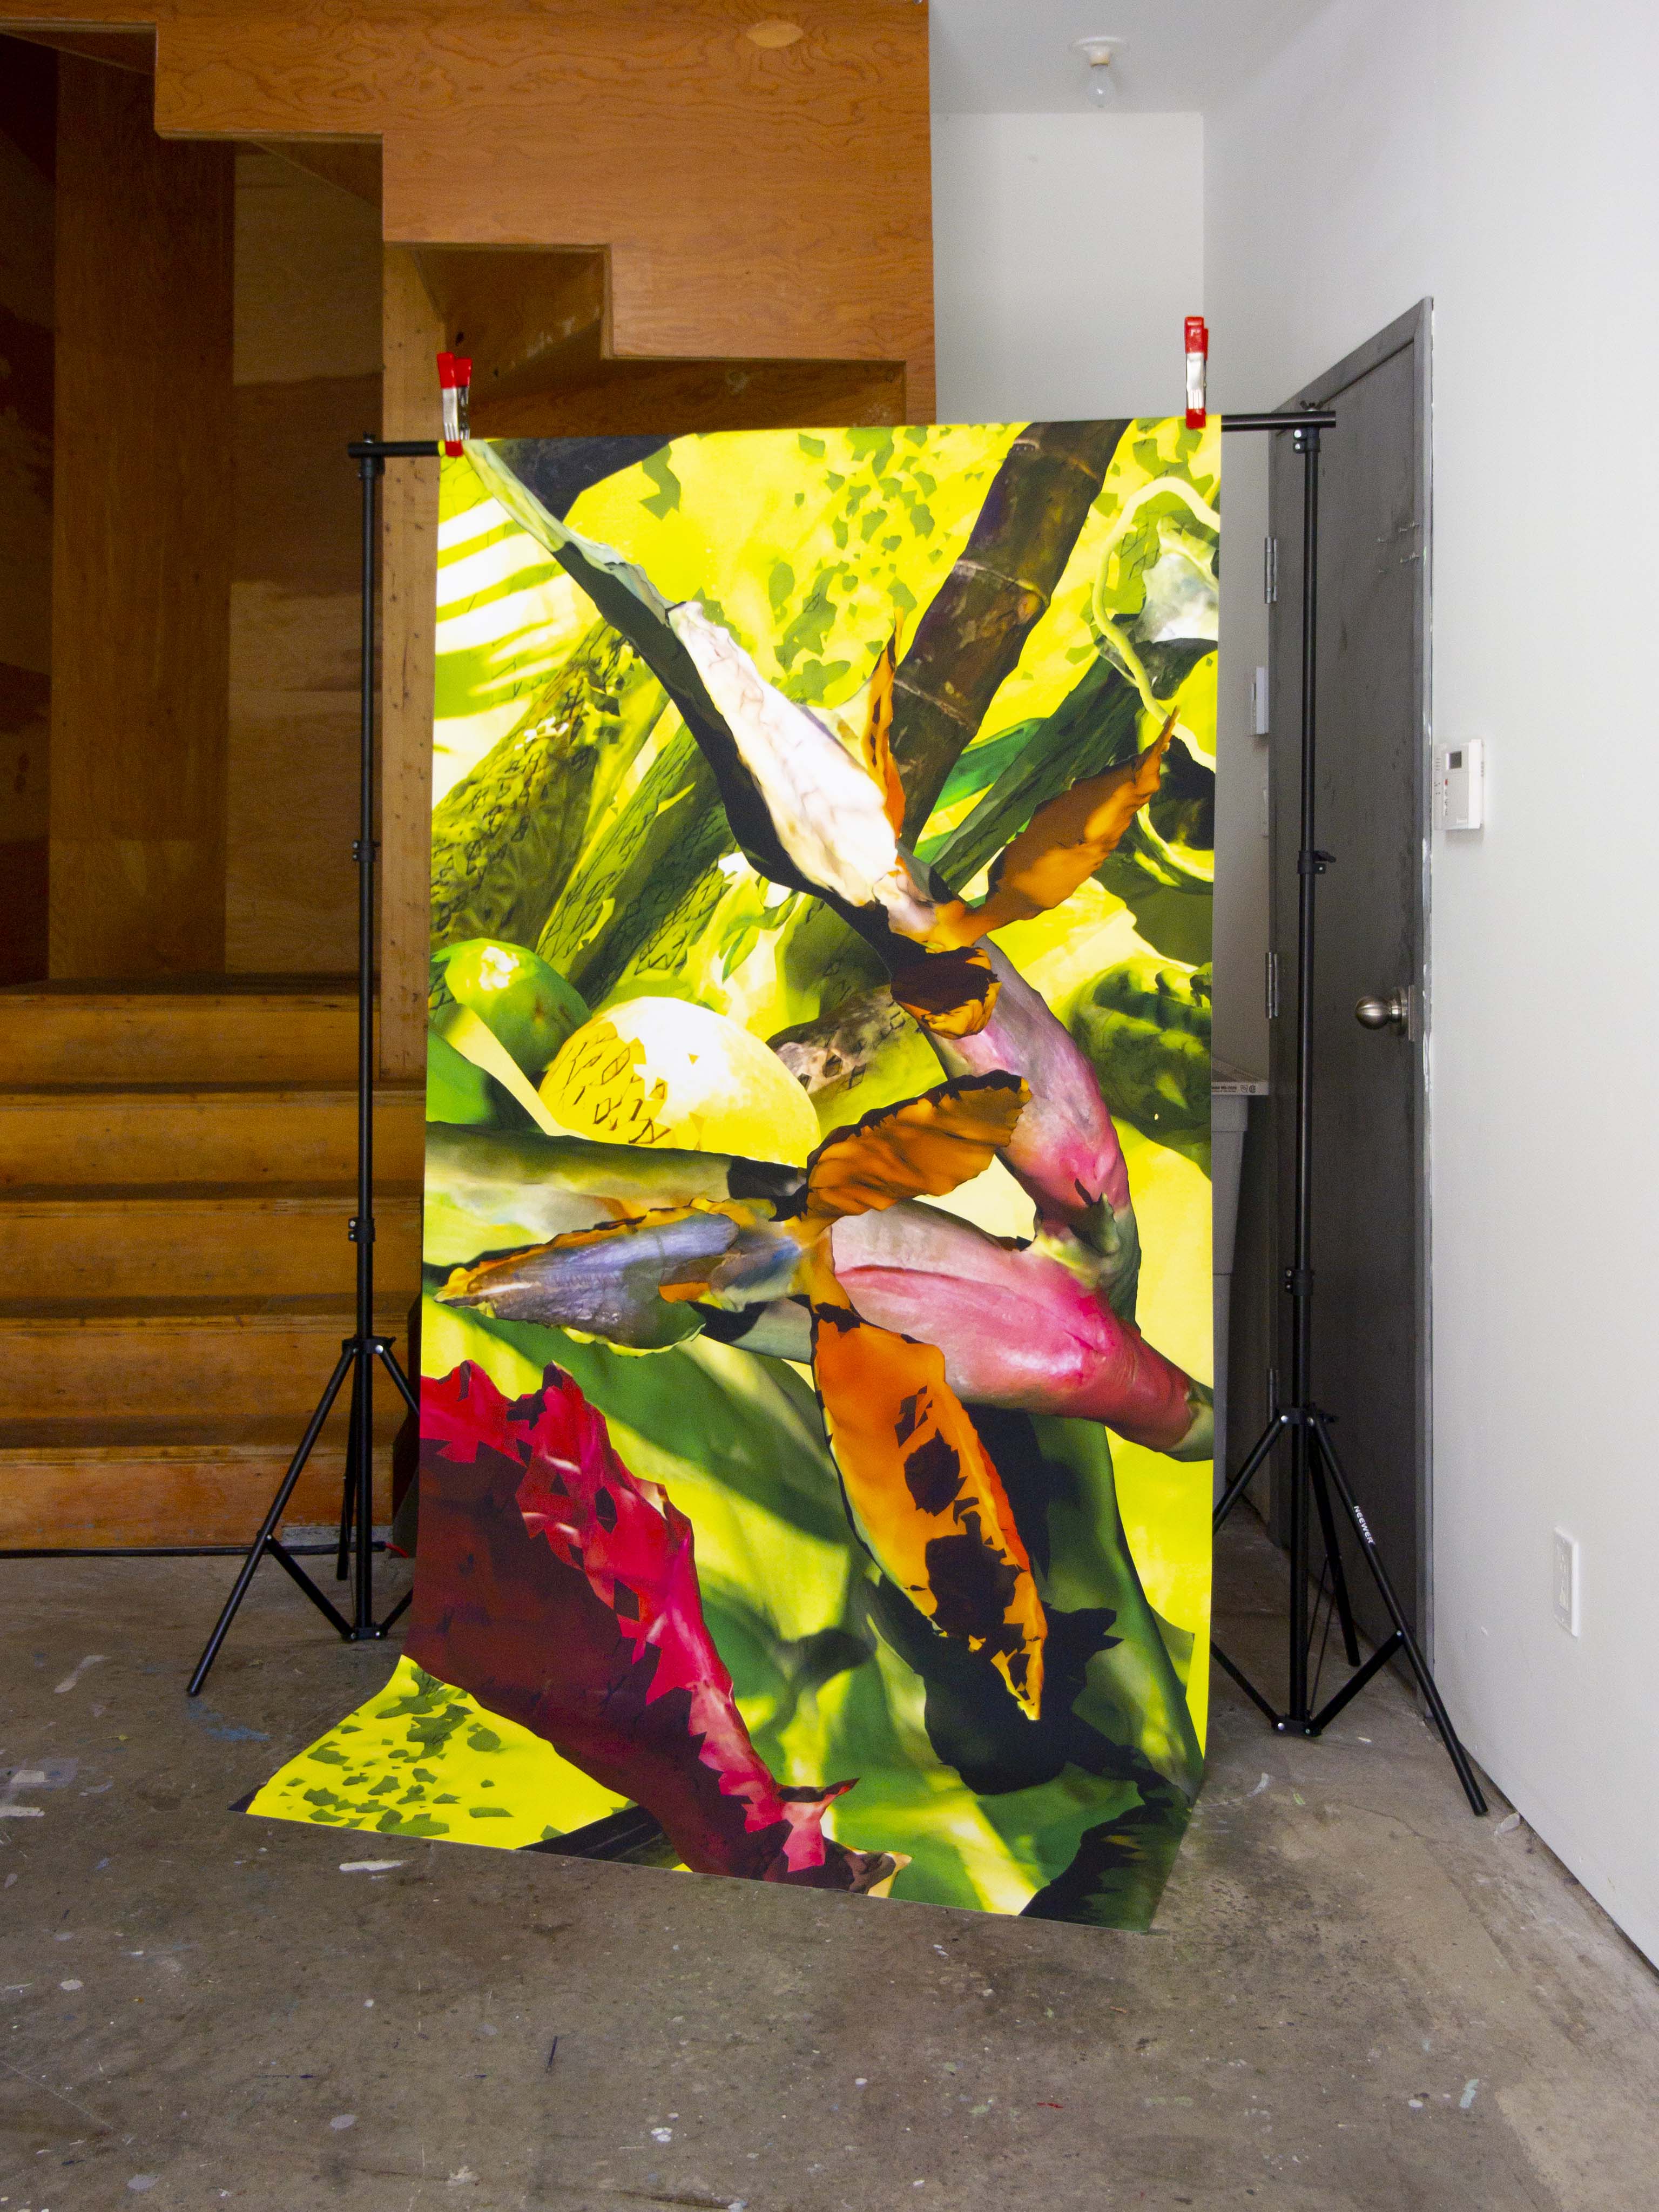 A collaged image of 3D scanned birds of paradise, sugar cane, ginger, and other plants on a large banner which is supported on a photo backdrop stand.